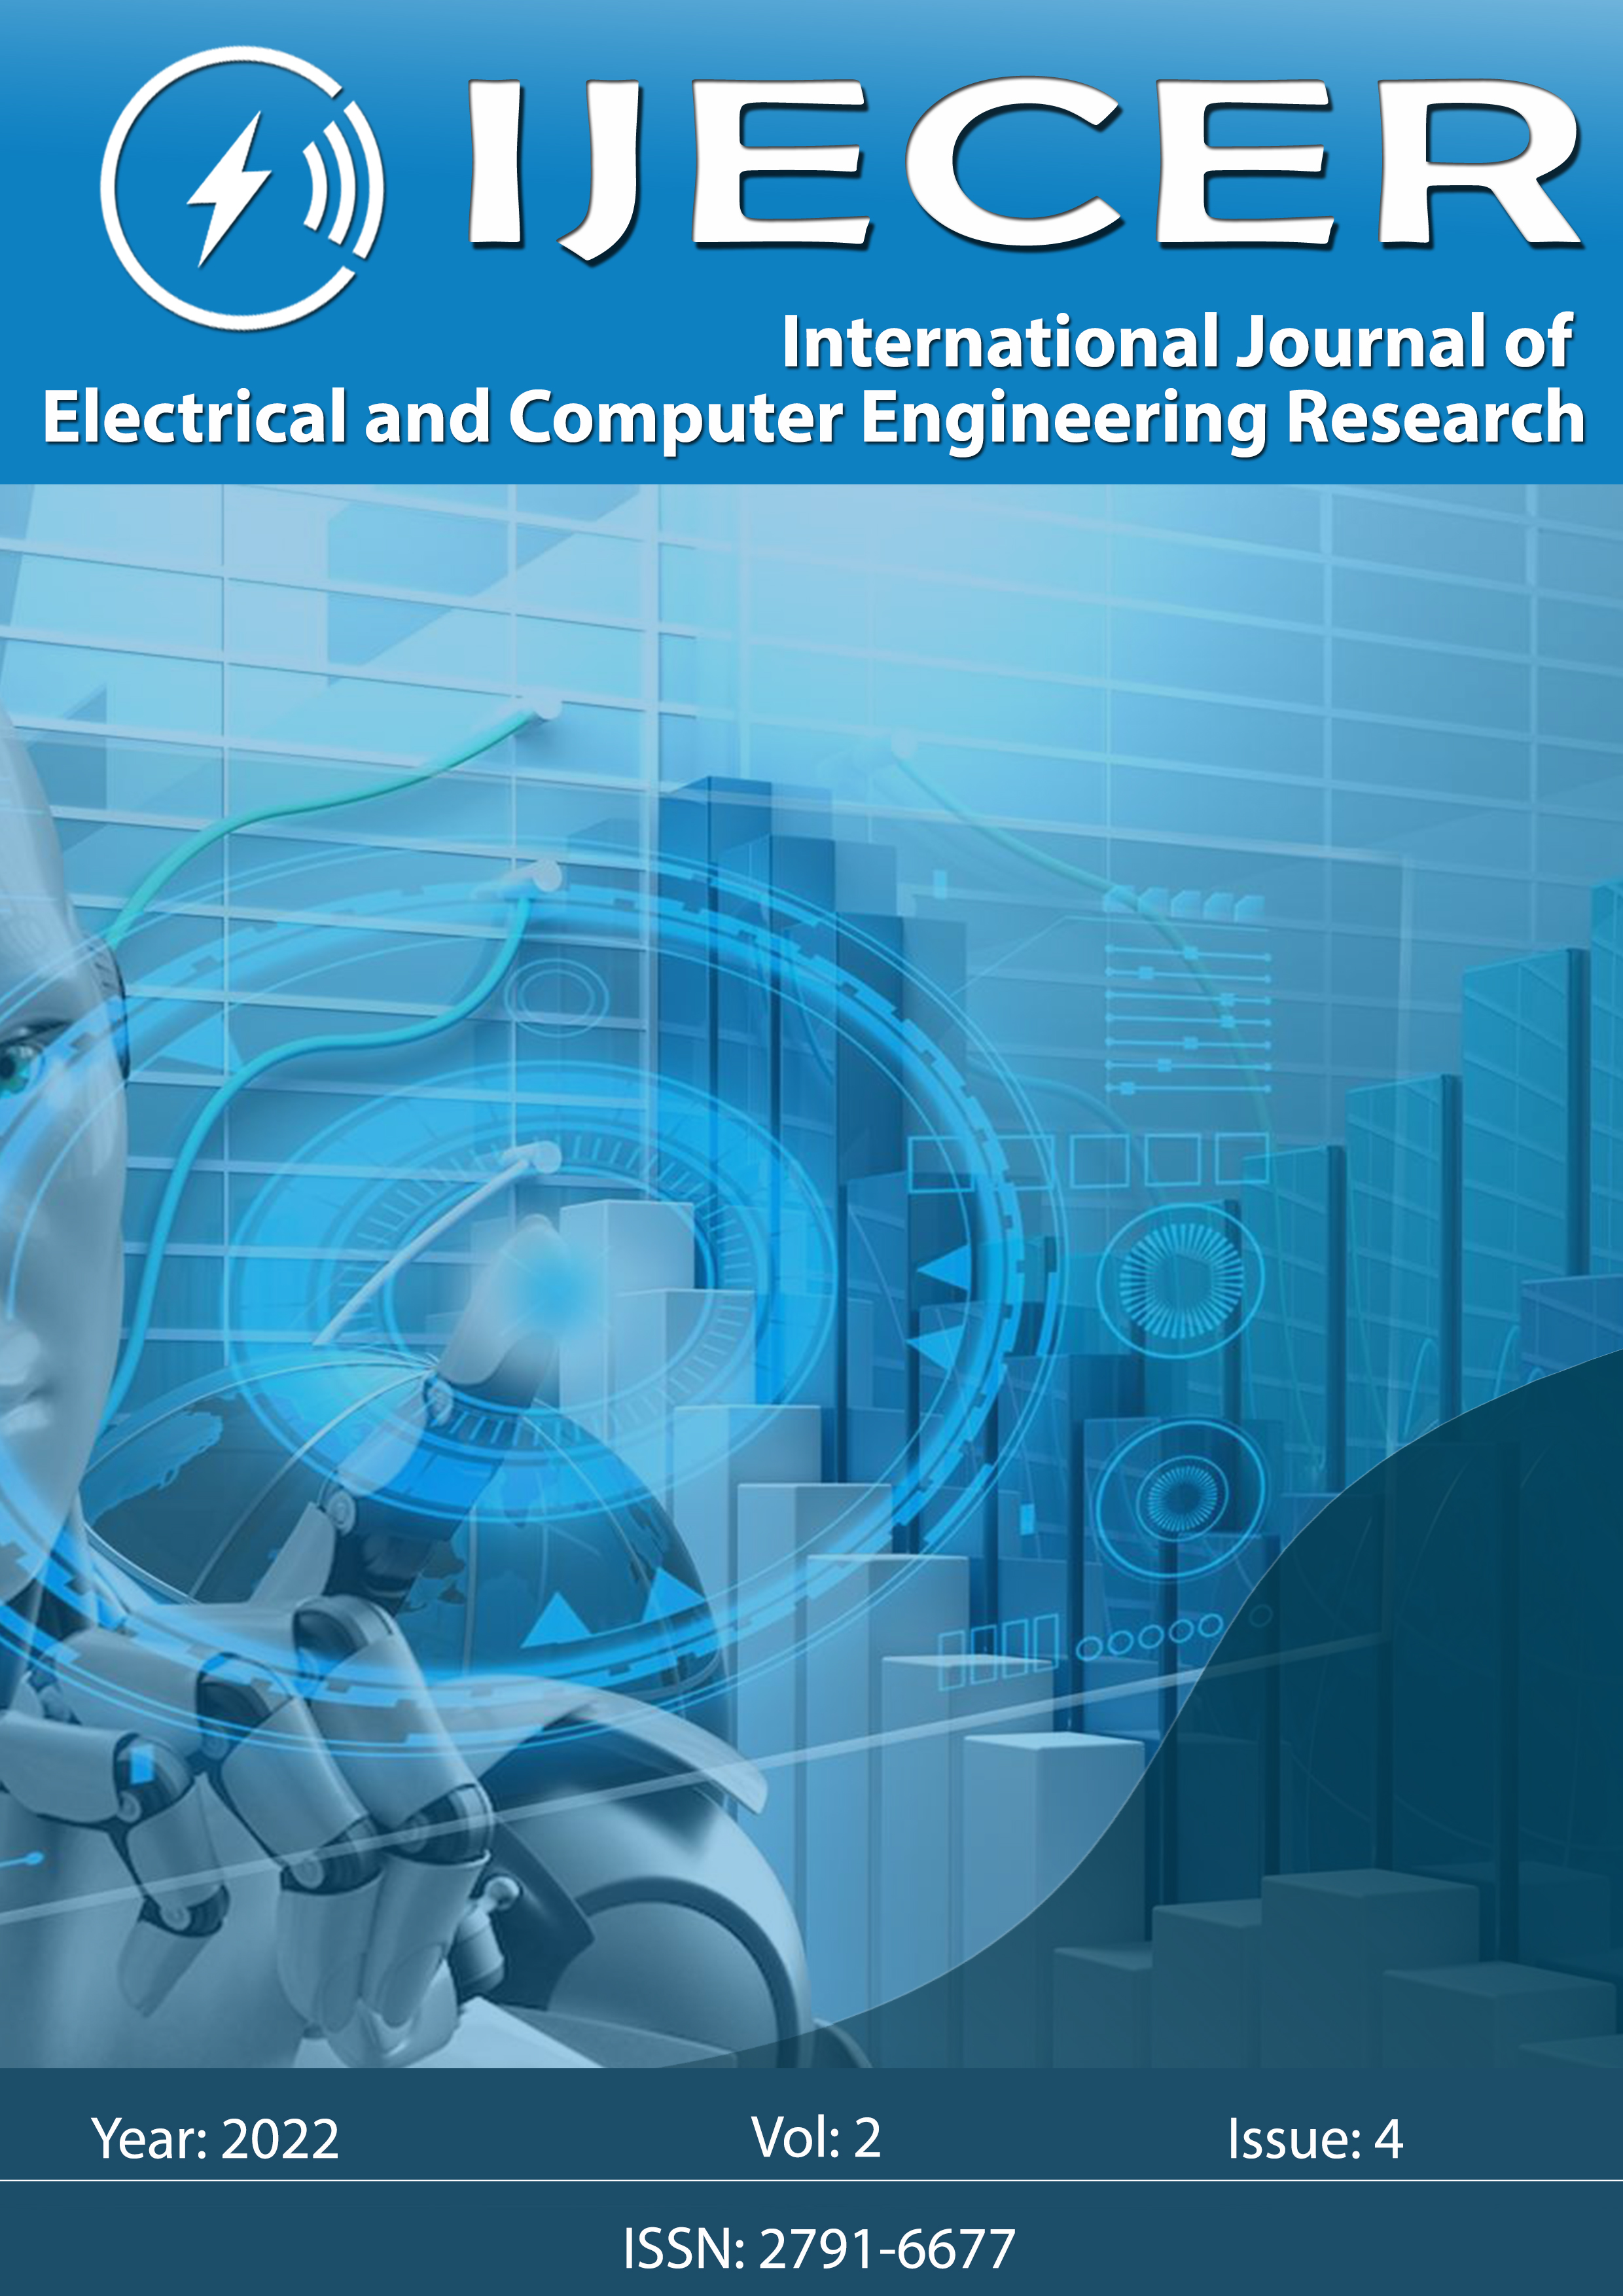 					View Vol. 2 No. 4 (2022): International Journal of Electrical and Computer Engineering Research
				